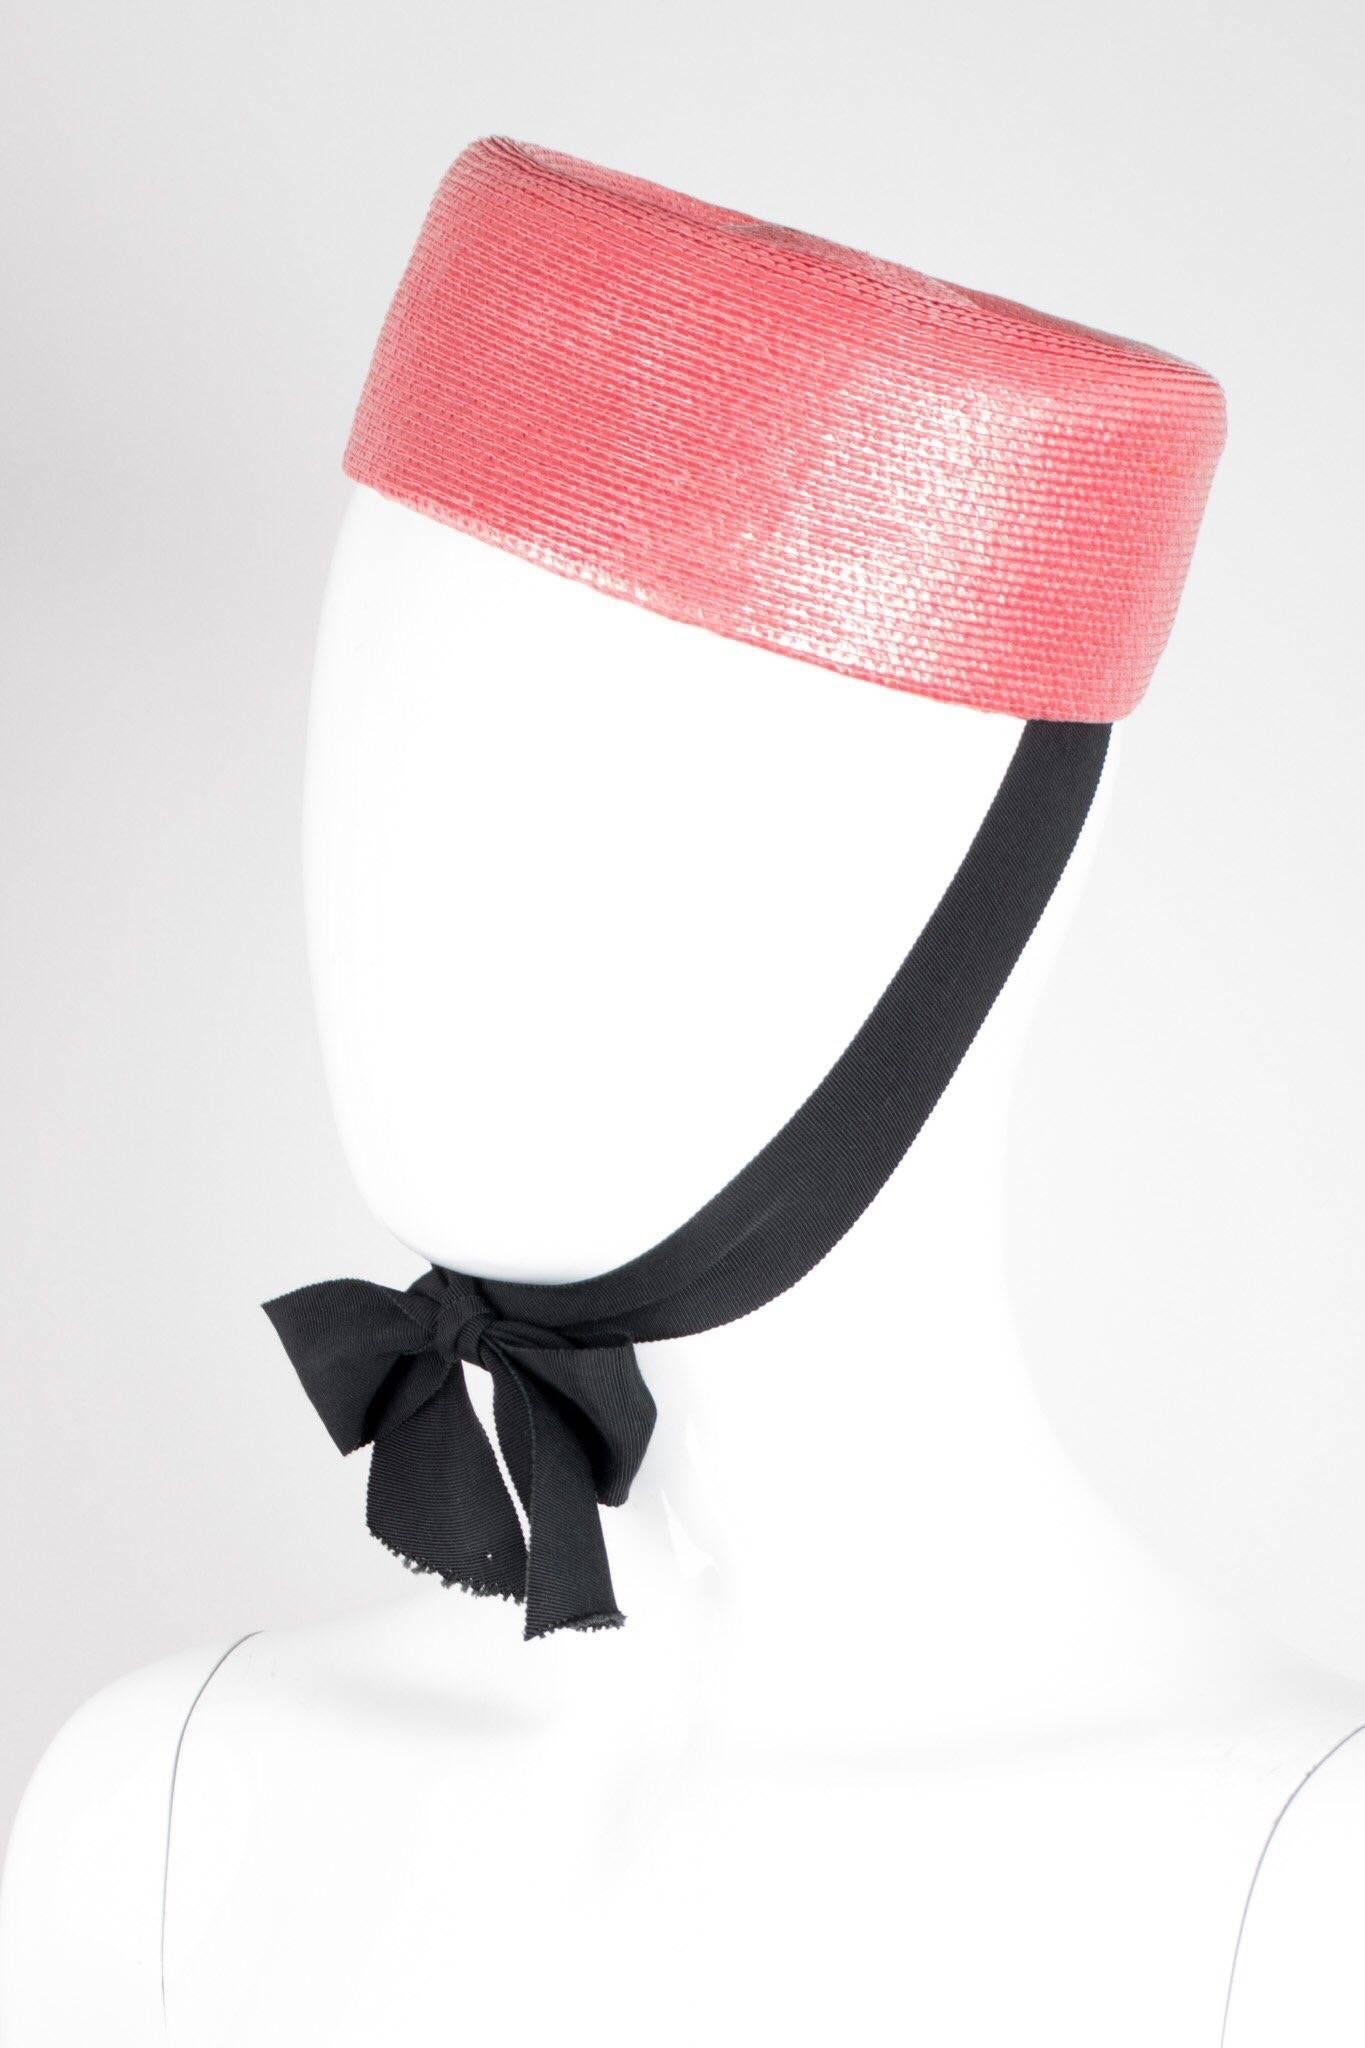 Cheeky straw pillbox hat by Yves Saint Laurent. Live out your Jackie O fantasies in this little ribbon-tied pillbox hat in a bright, cheerful color. We would update the look for daily use and wear with jeans, a cropped boxy jacket, and a pair of